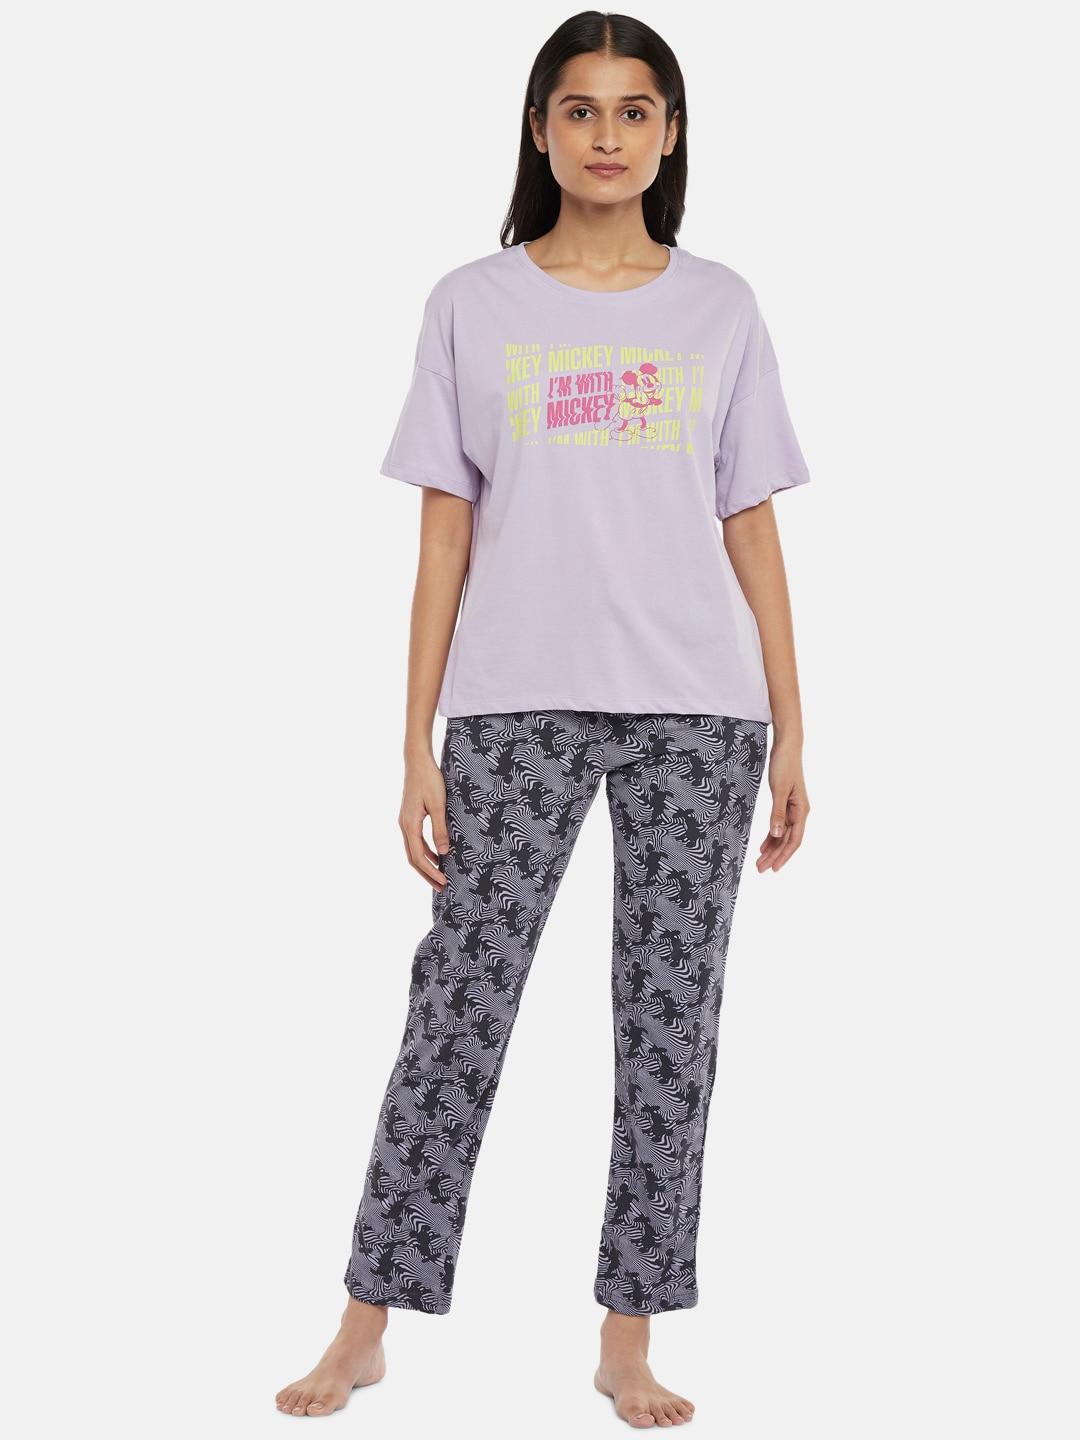 Dreamz by Pantaloons Typography Printed Pure Cotton Night Suit